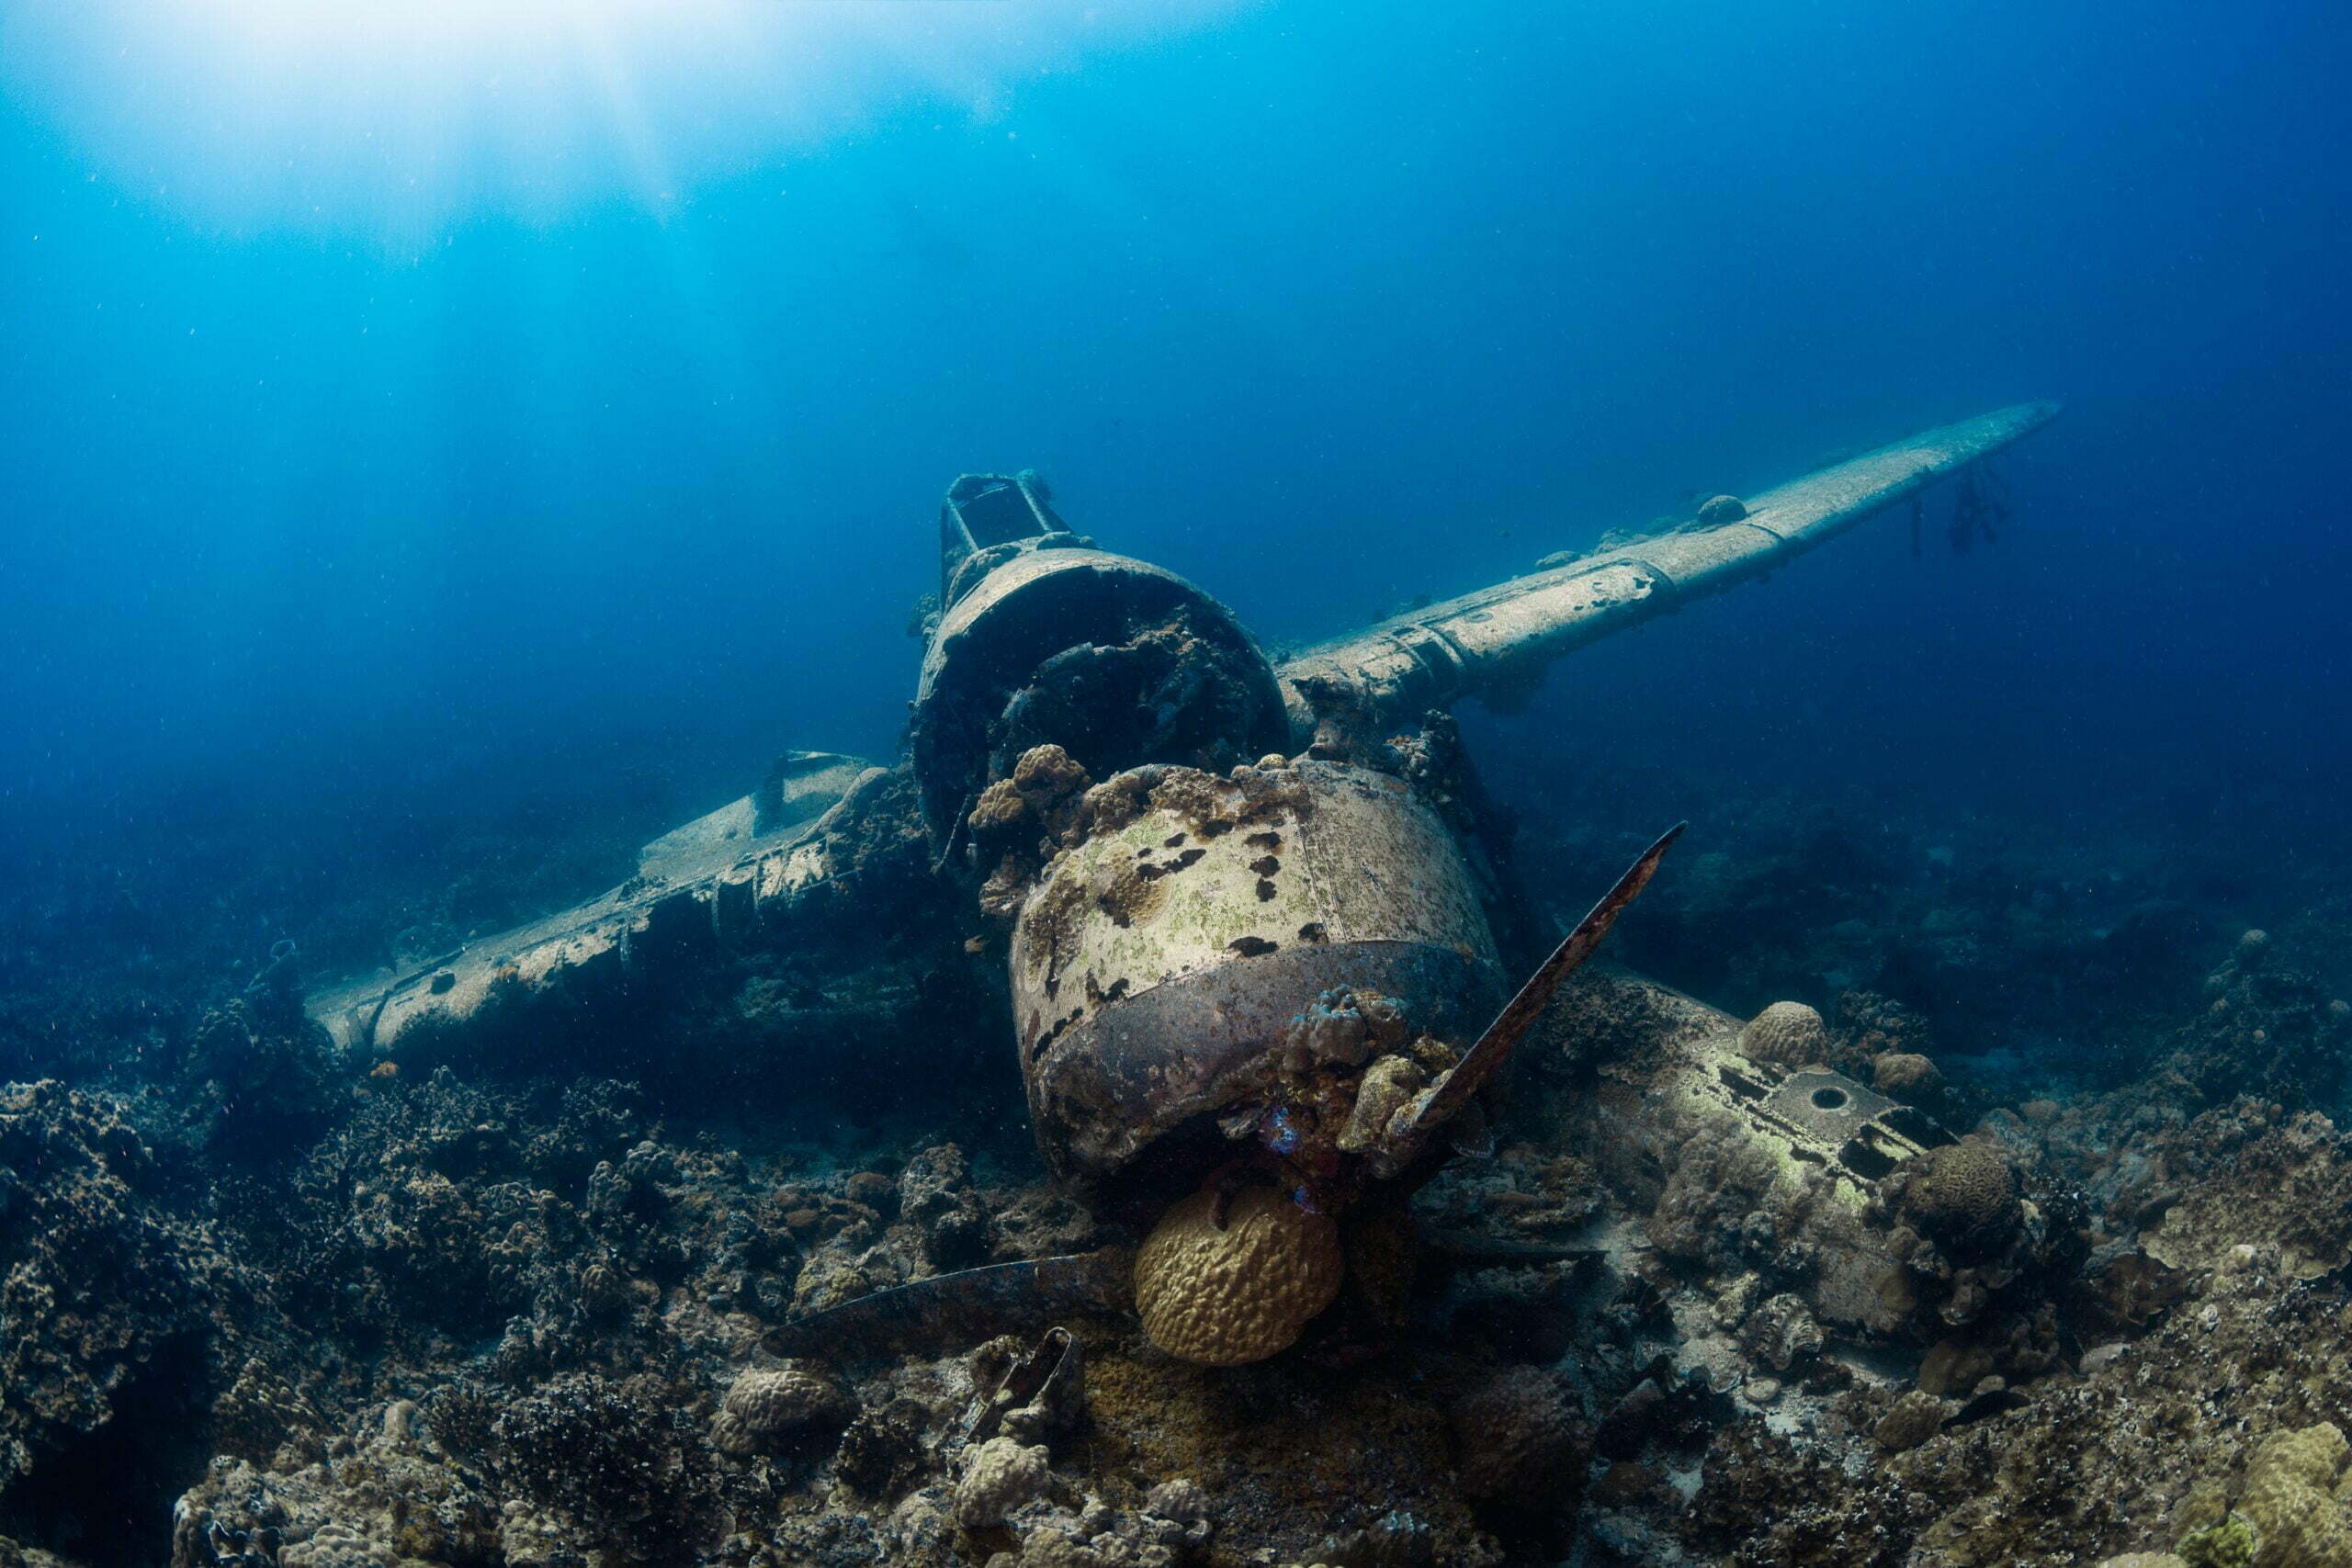 The eerie remains of Jake Sea Plane, a WWII relic resting peacefully in Palau's turquoise waters. - Photo by Milos Prelevic at Unsplash